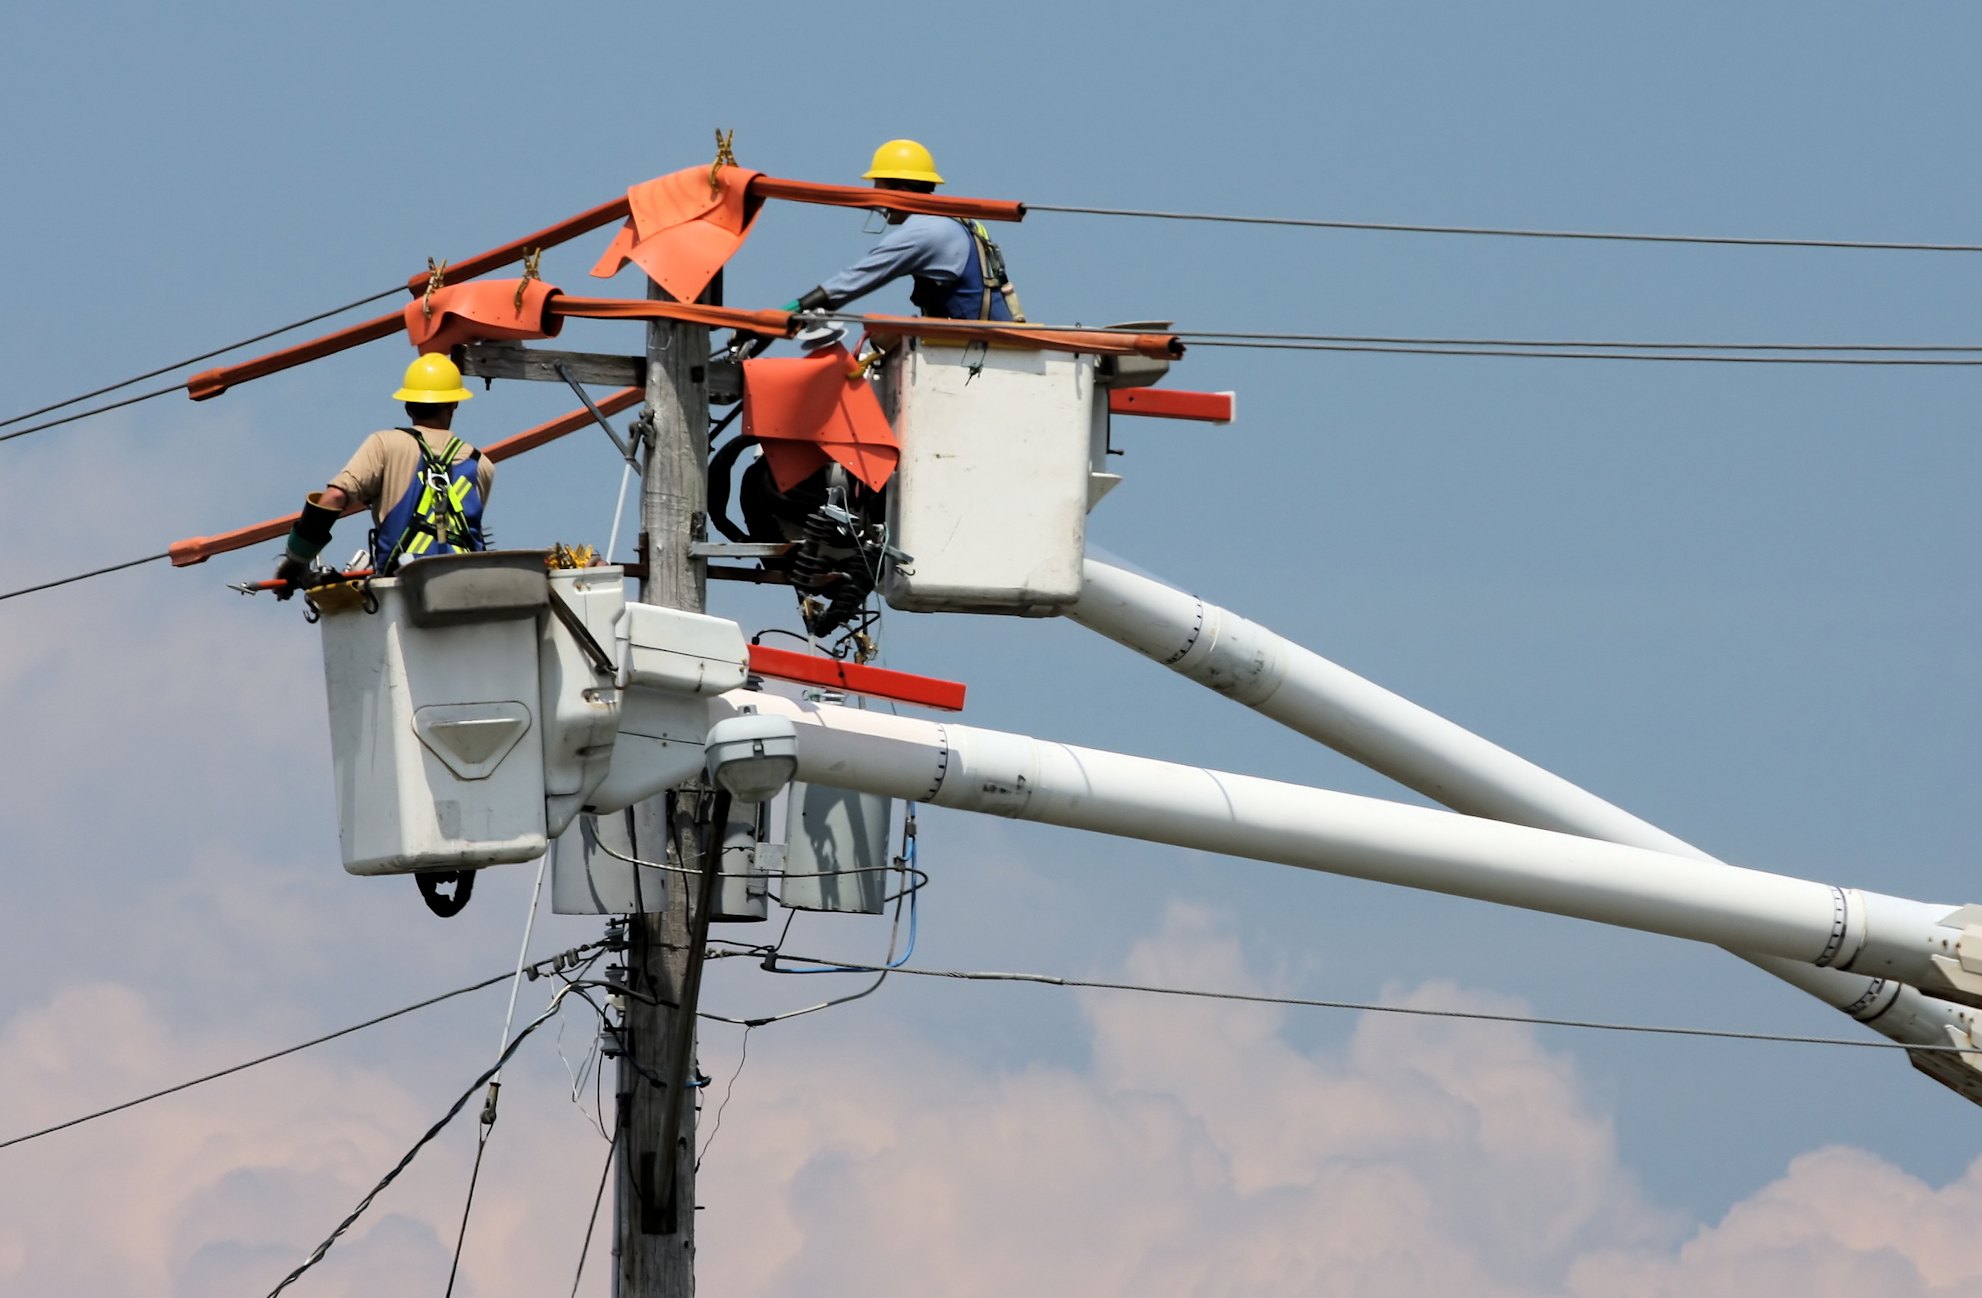 View of two electrical lineworkers working on electrical poles and wires in a bucket truck